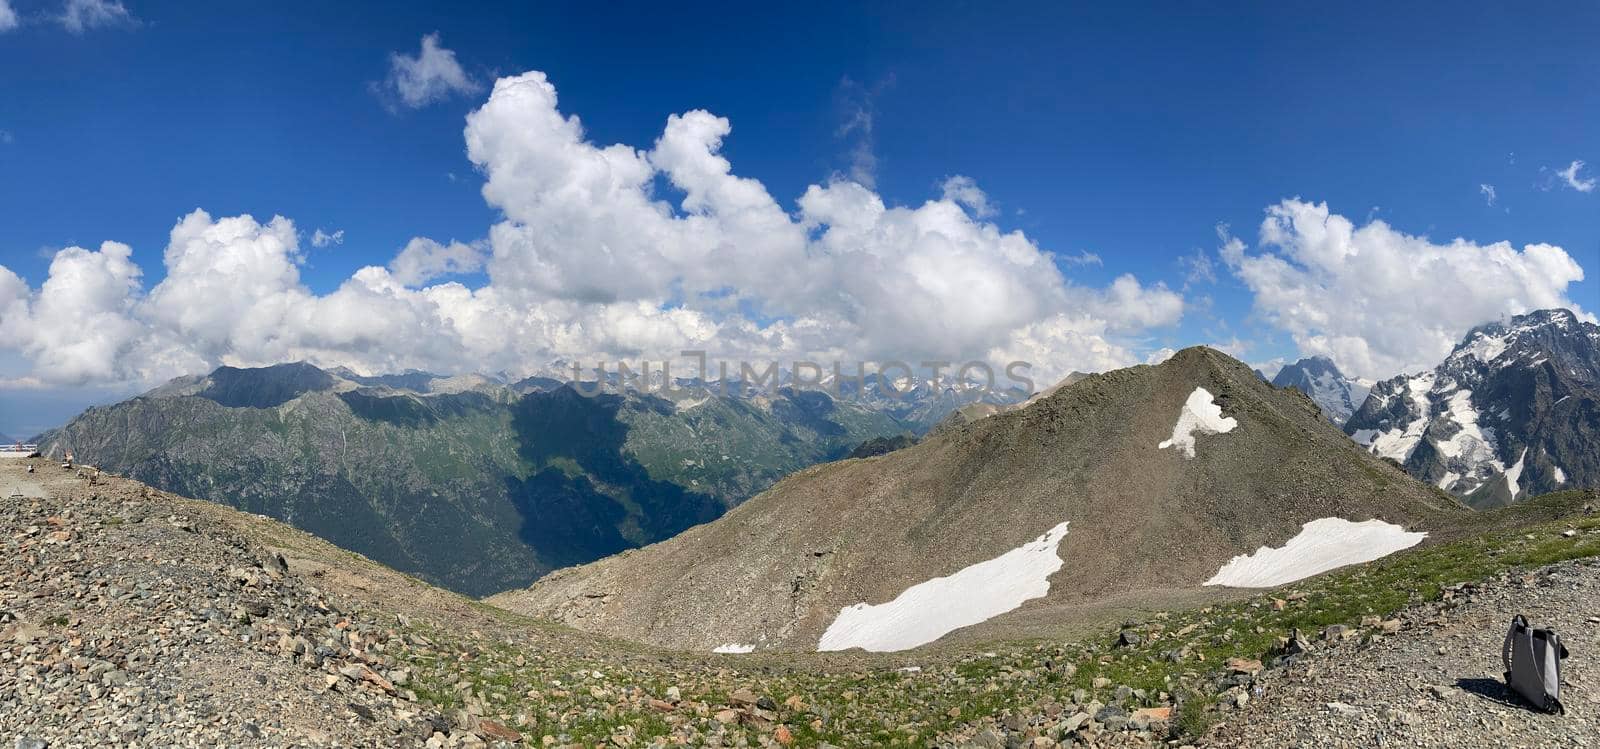 Panorama. Snowy mountain against cloudy sky. From below white clouds floating on blue sky over mountain ridge covered with snow on sunny day in nature by epidemiks